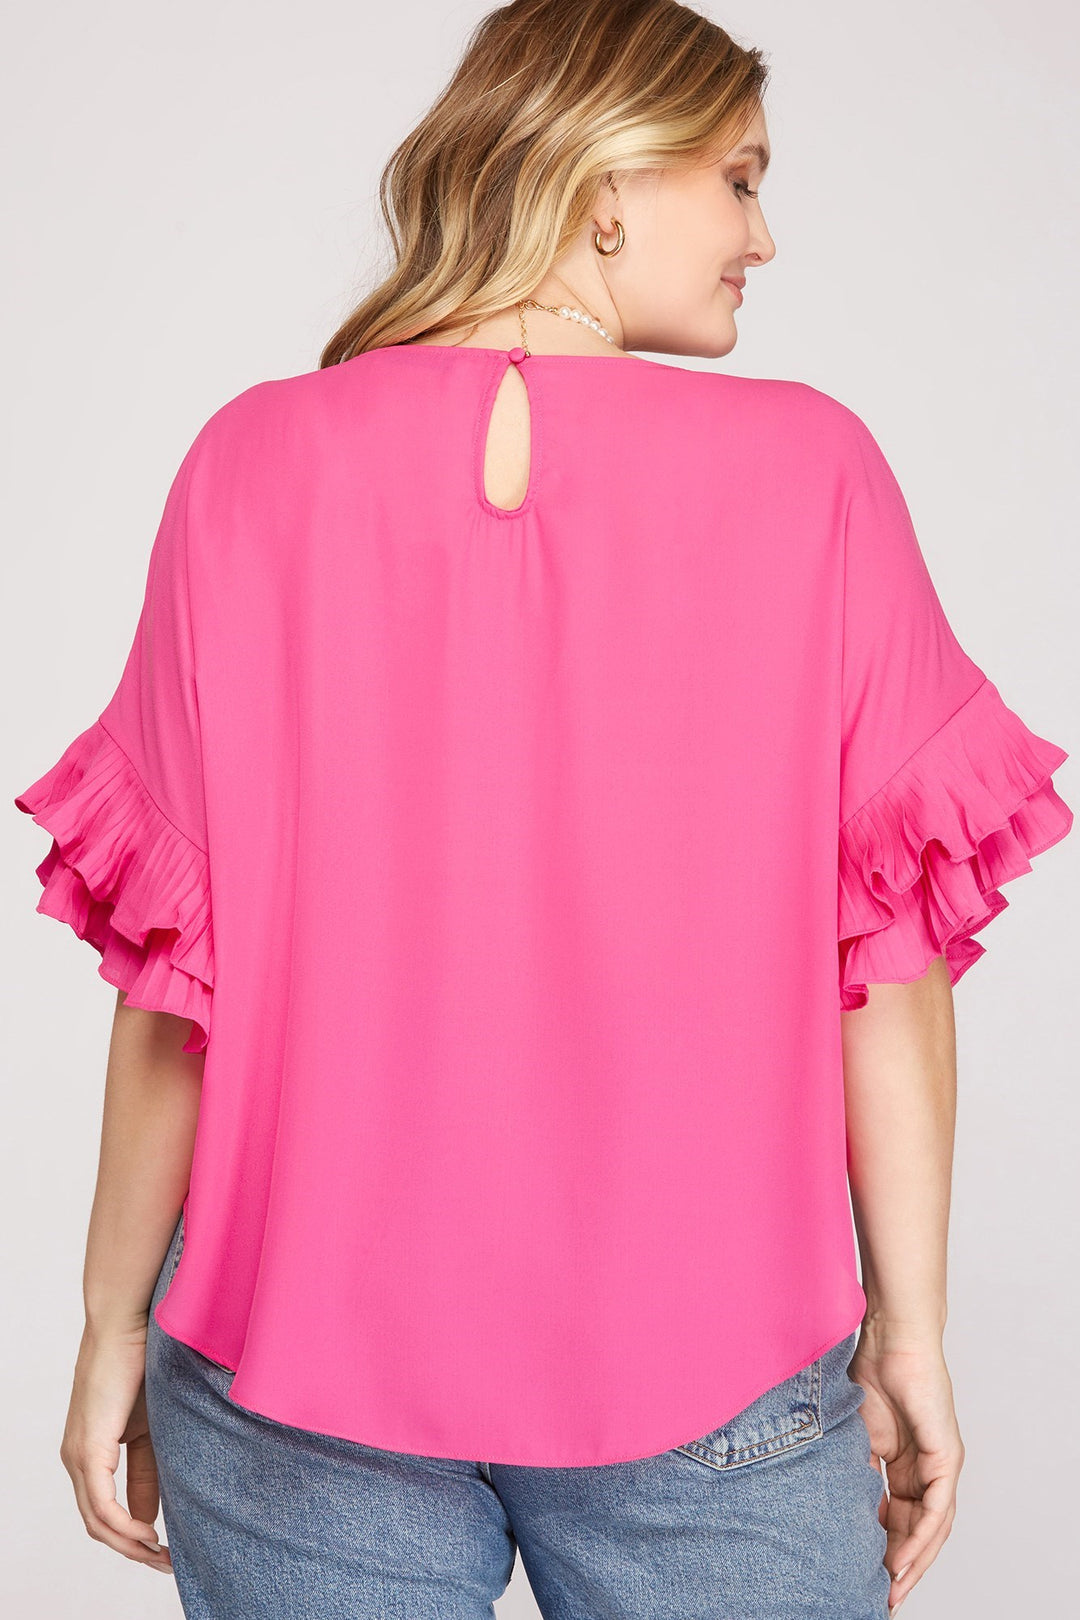 Josie Pleated Ruffle Sleeved Top, Hot Pink-Short Sleeve Tops-Inspired by Justeen-Women's Clothing Boutique in Chicago, Illinois